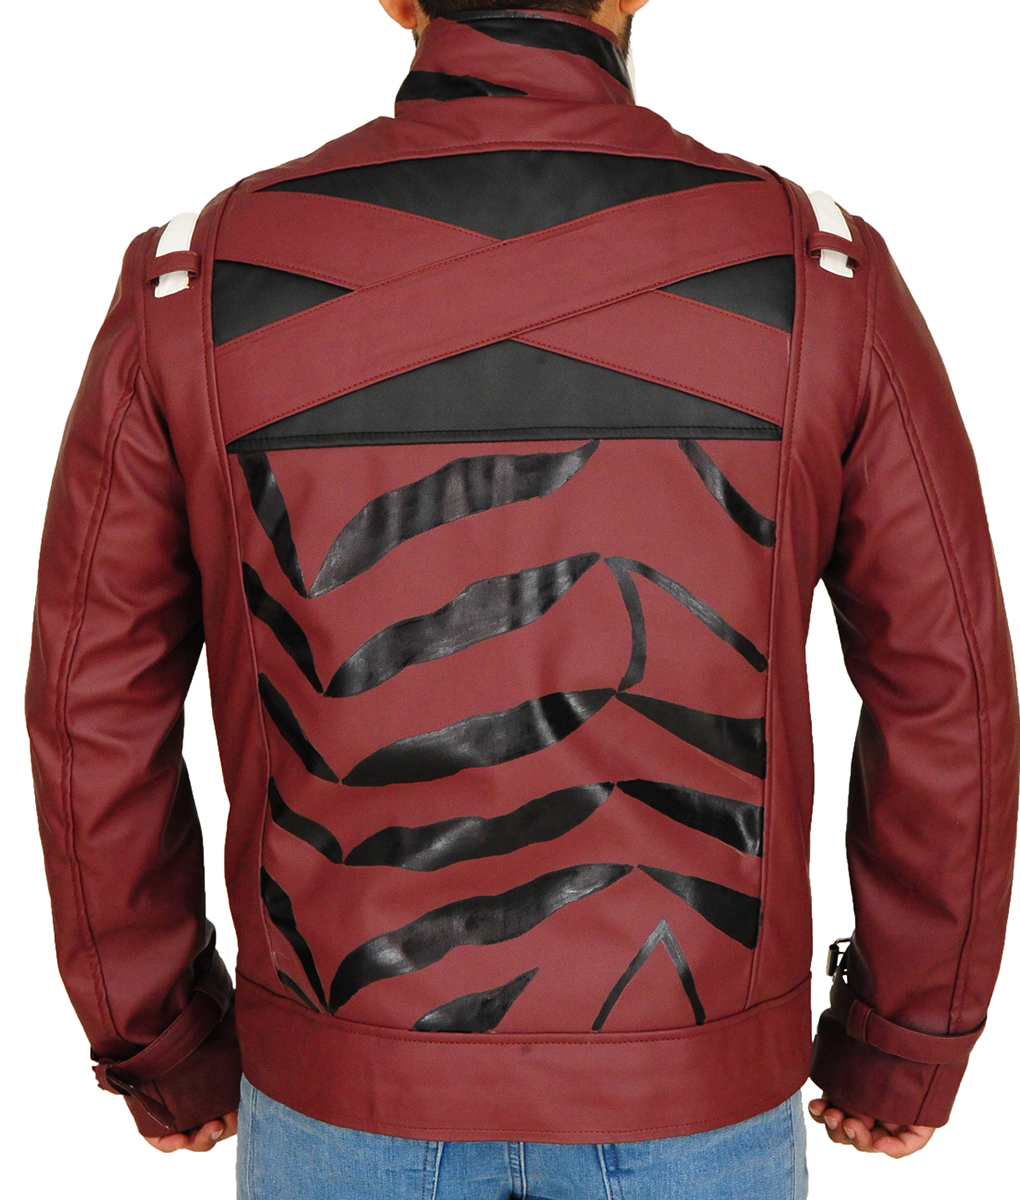 Travis Touchdown No More Heroes Jacket (5)